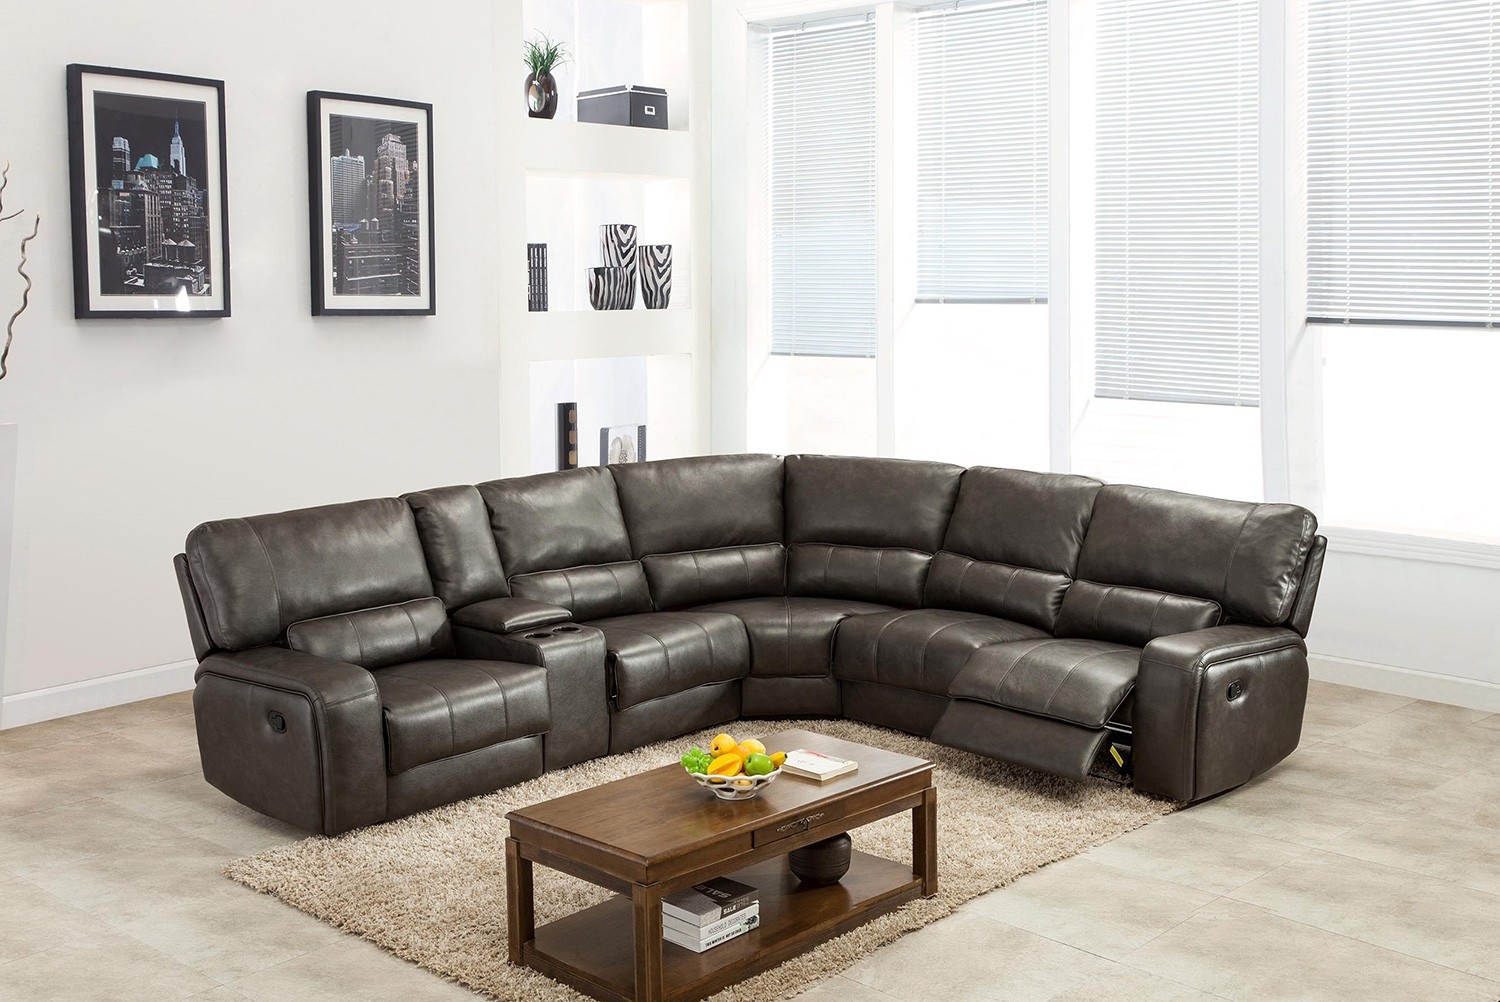 246'' X 40'' X 41'' Modern Gray Leather Sectional With Power Recliners